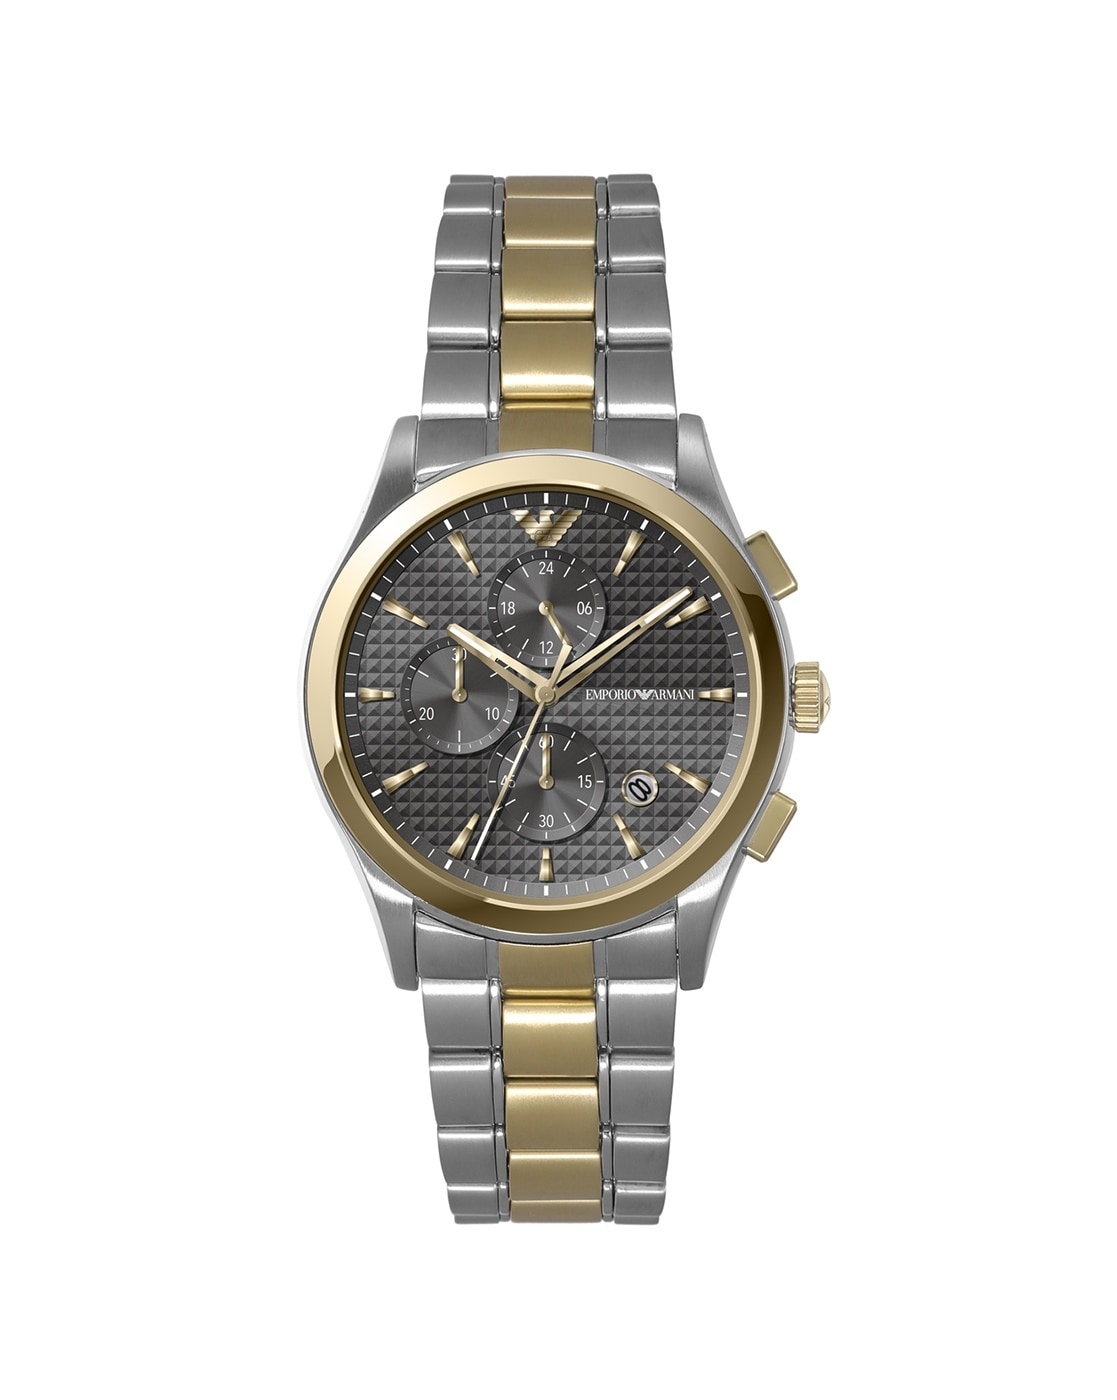 Armani Watch Online - Buy Armani Watches For Men - Dilli Bazar-cokhiquangminh.vn